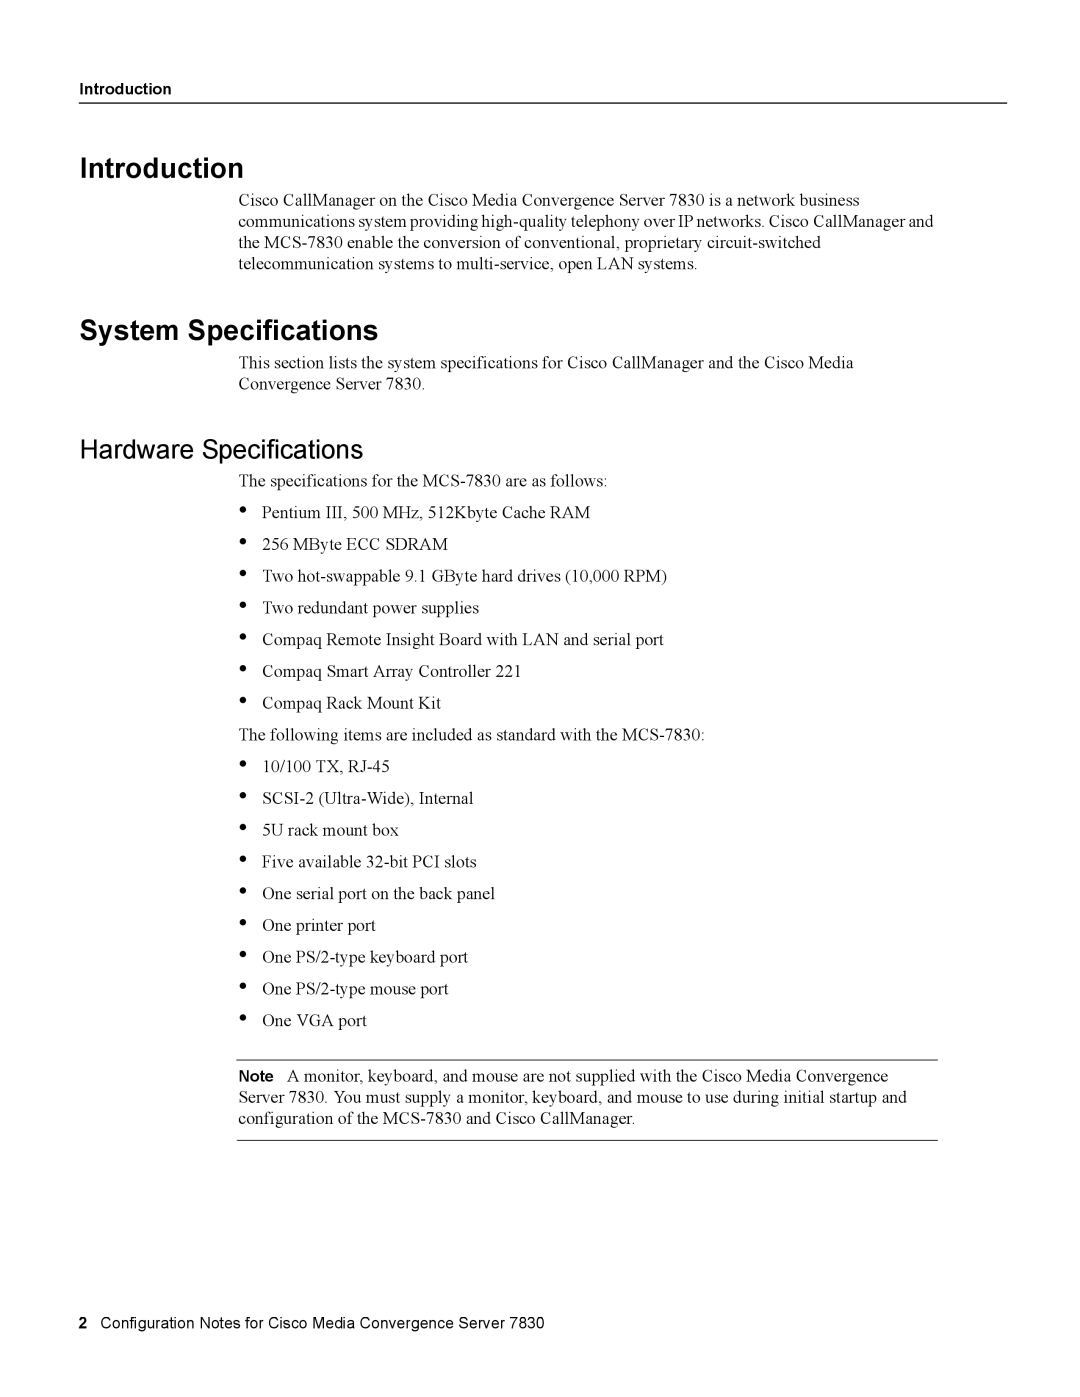 Cisco Systems 7830 specifications Introduction, System Specifications, Hardware Specifications 